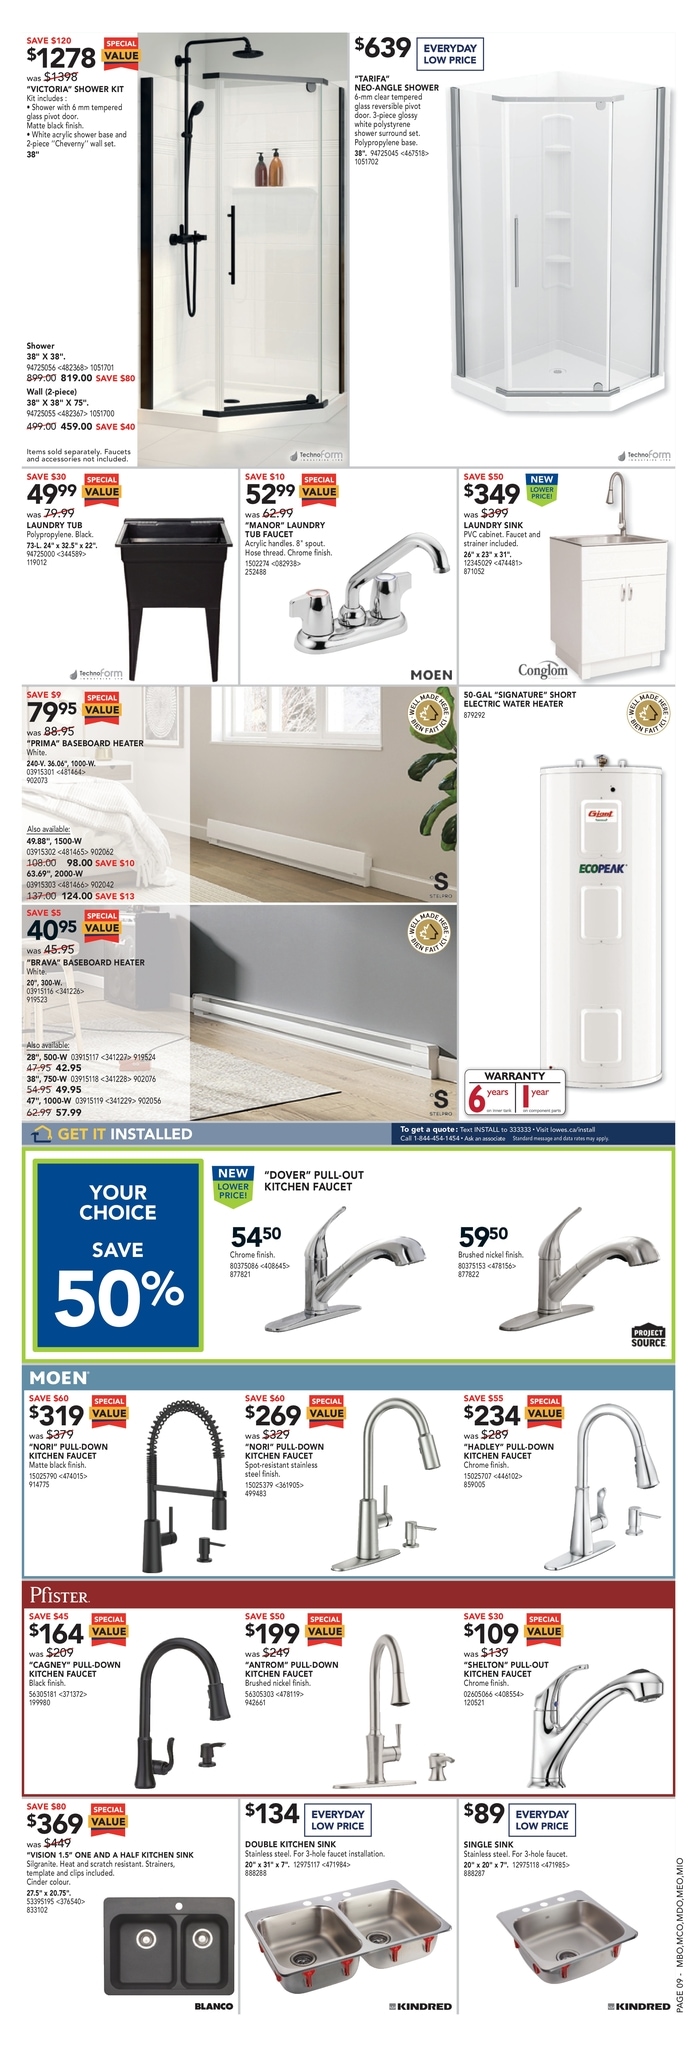 Lowe's - Weekly Flyer Specials - Page 10